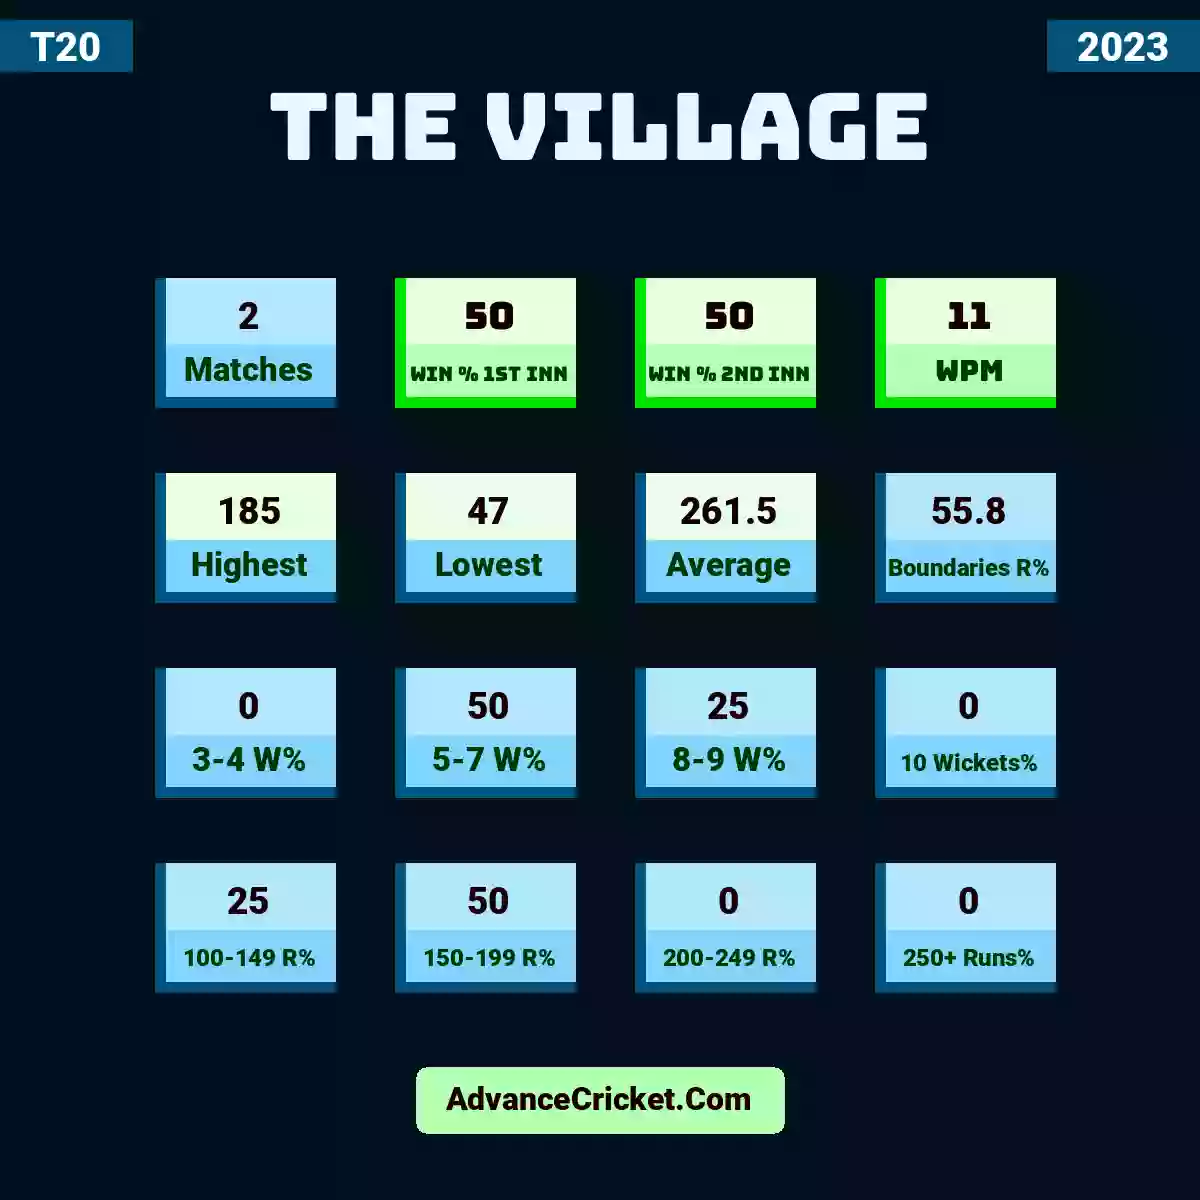 Image showing The Village with Matches: 2, Win % 1st Inn: 50, Win % 2nd Inn: 50, WPM: 11, Highest: 185, Lowest: 47, Average: 261.5, Boundaries R%: 55.8, 3-4 W%: 0, 5-7 W%: 50, 8-9 W%: 25, 10 Wickets%: 0, 100-149 R%: 25, 150-199 R%: 50, 200-249 R%: 0, 250+ Runs%: 0.